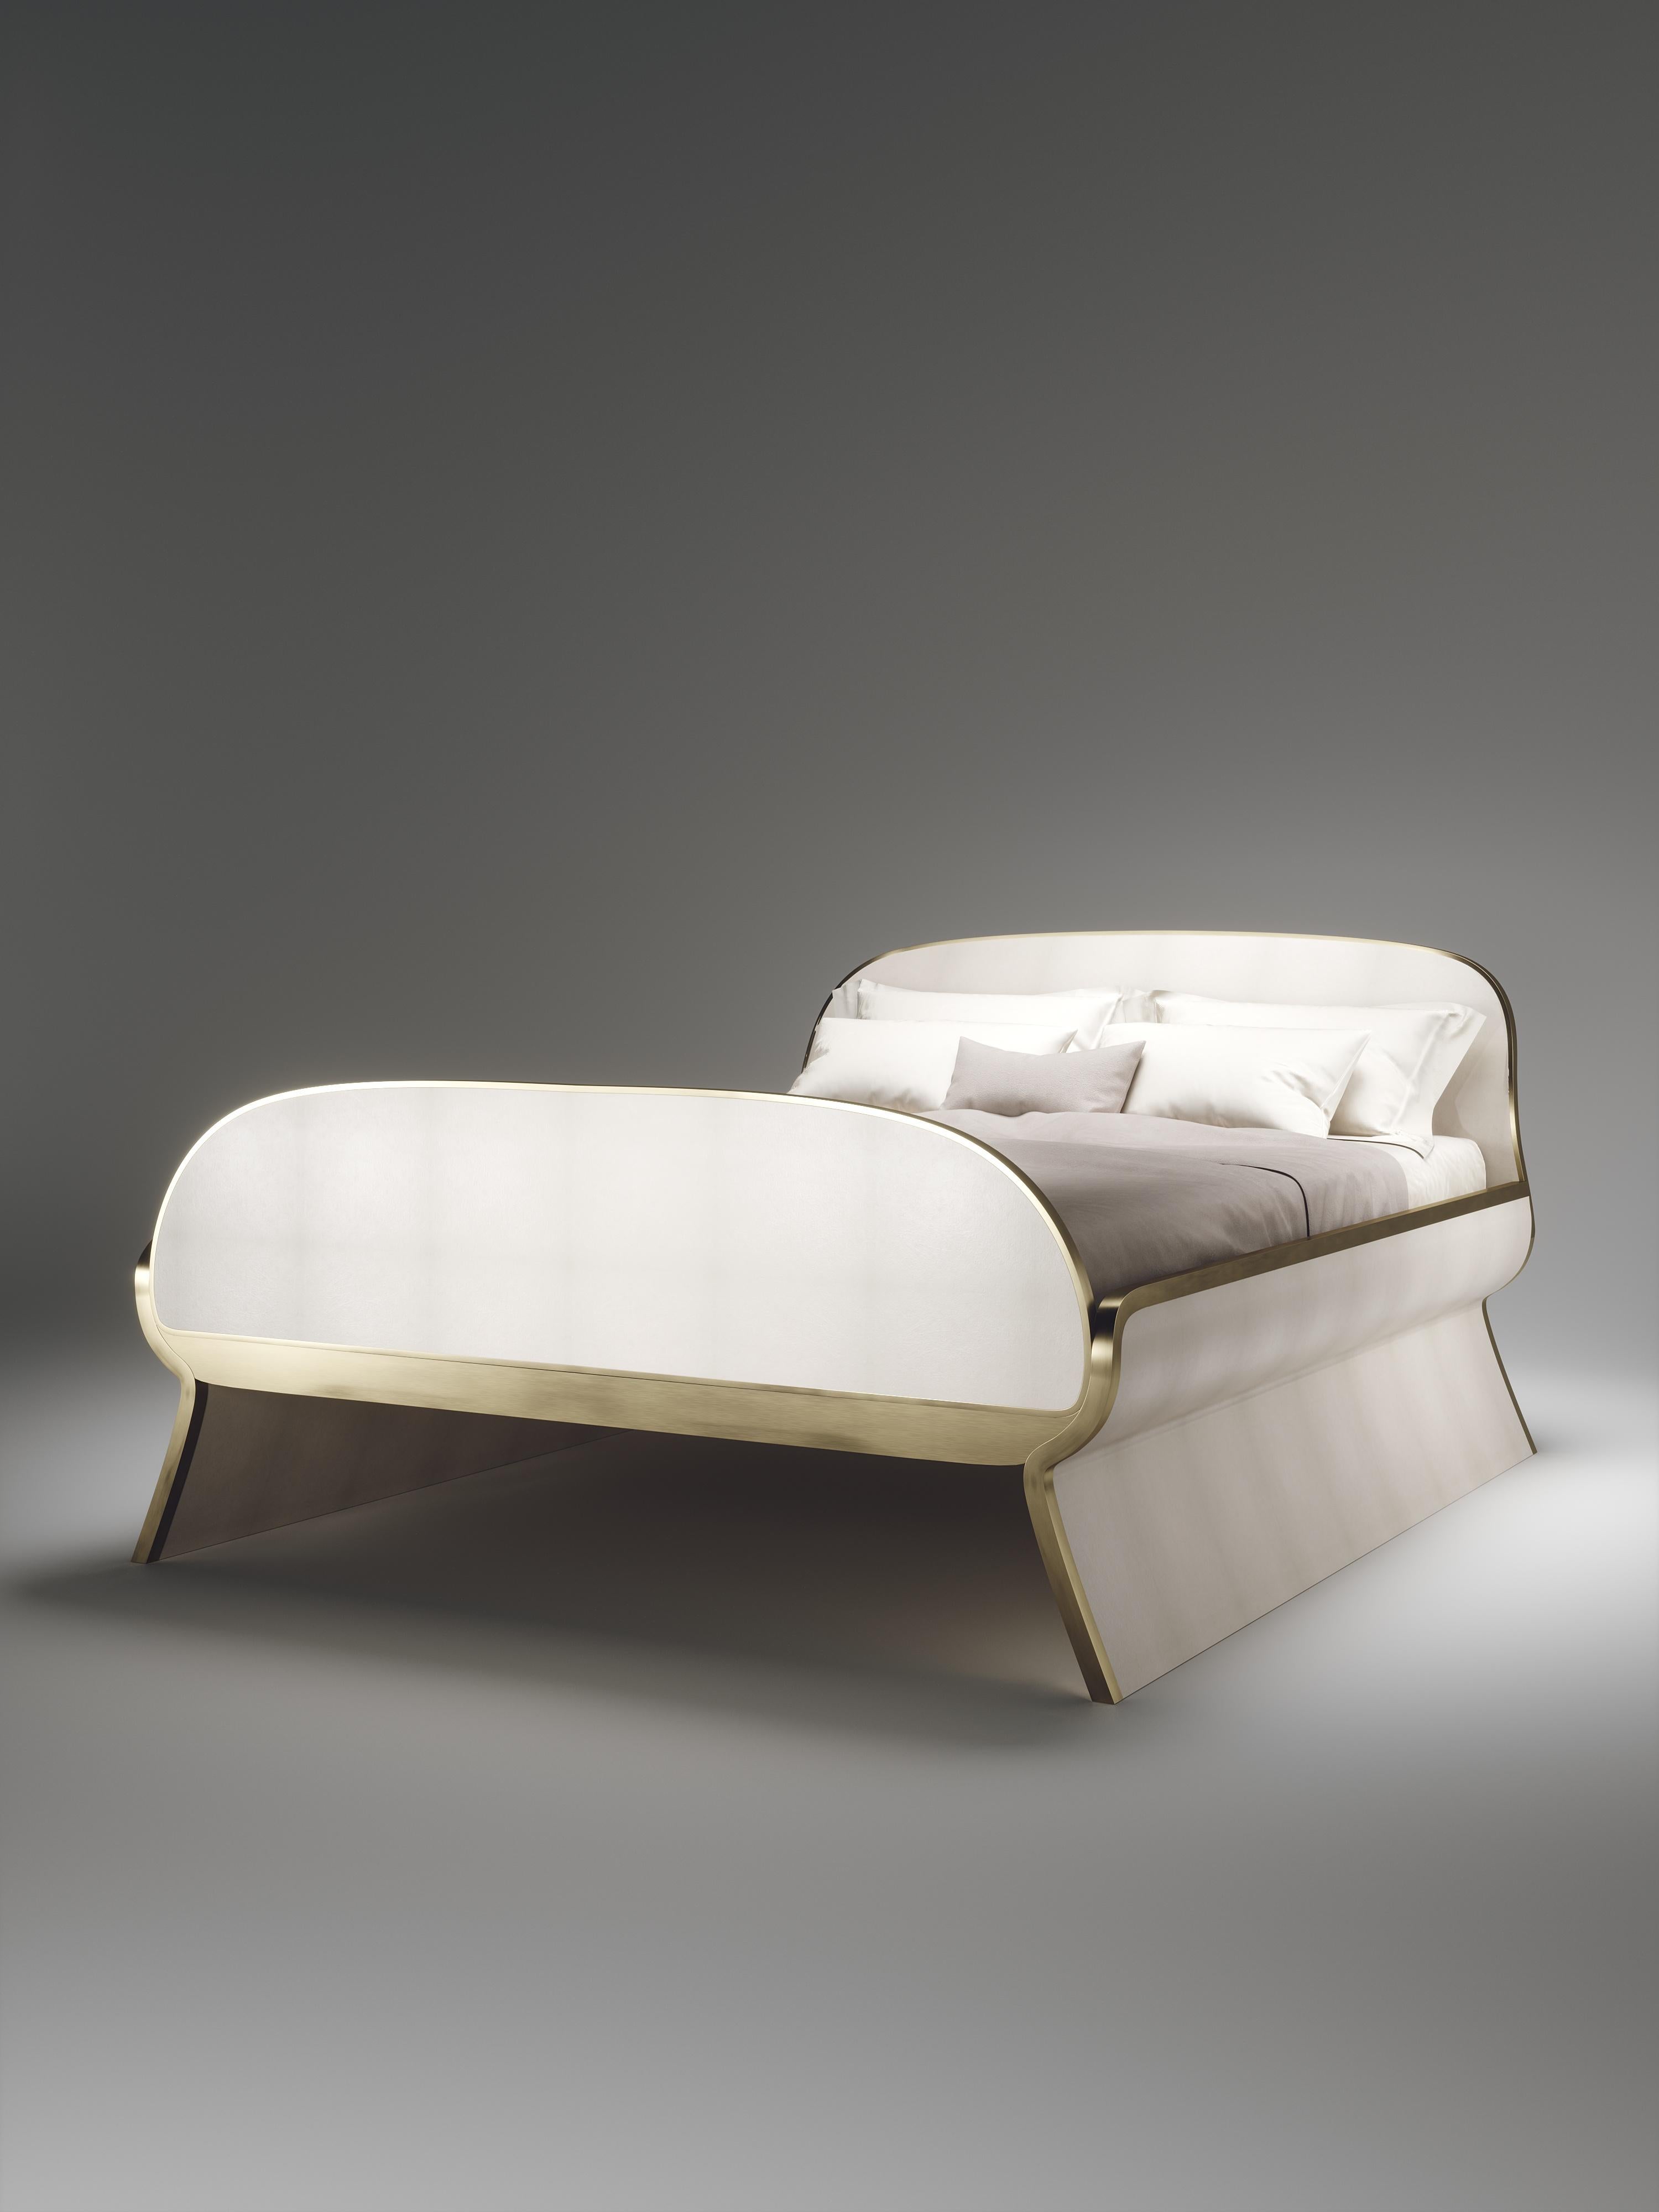 Hand-Crafted Dandy Bed in Parchment and Bronze-Patina Brass by Kifu, Paris For Sale